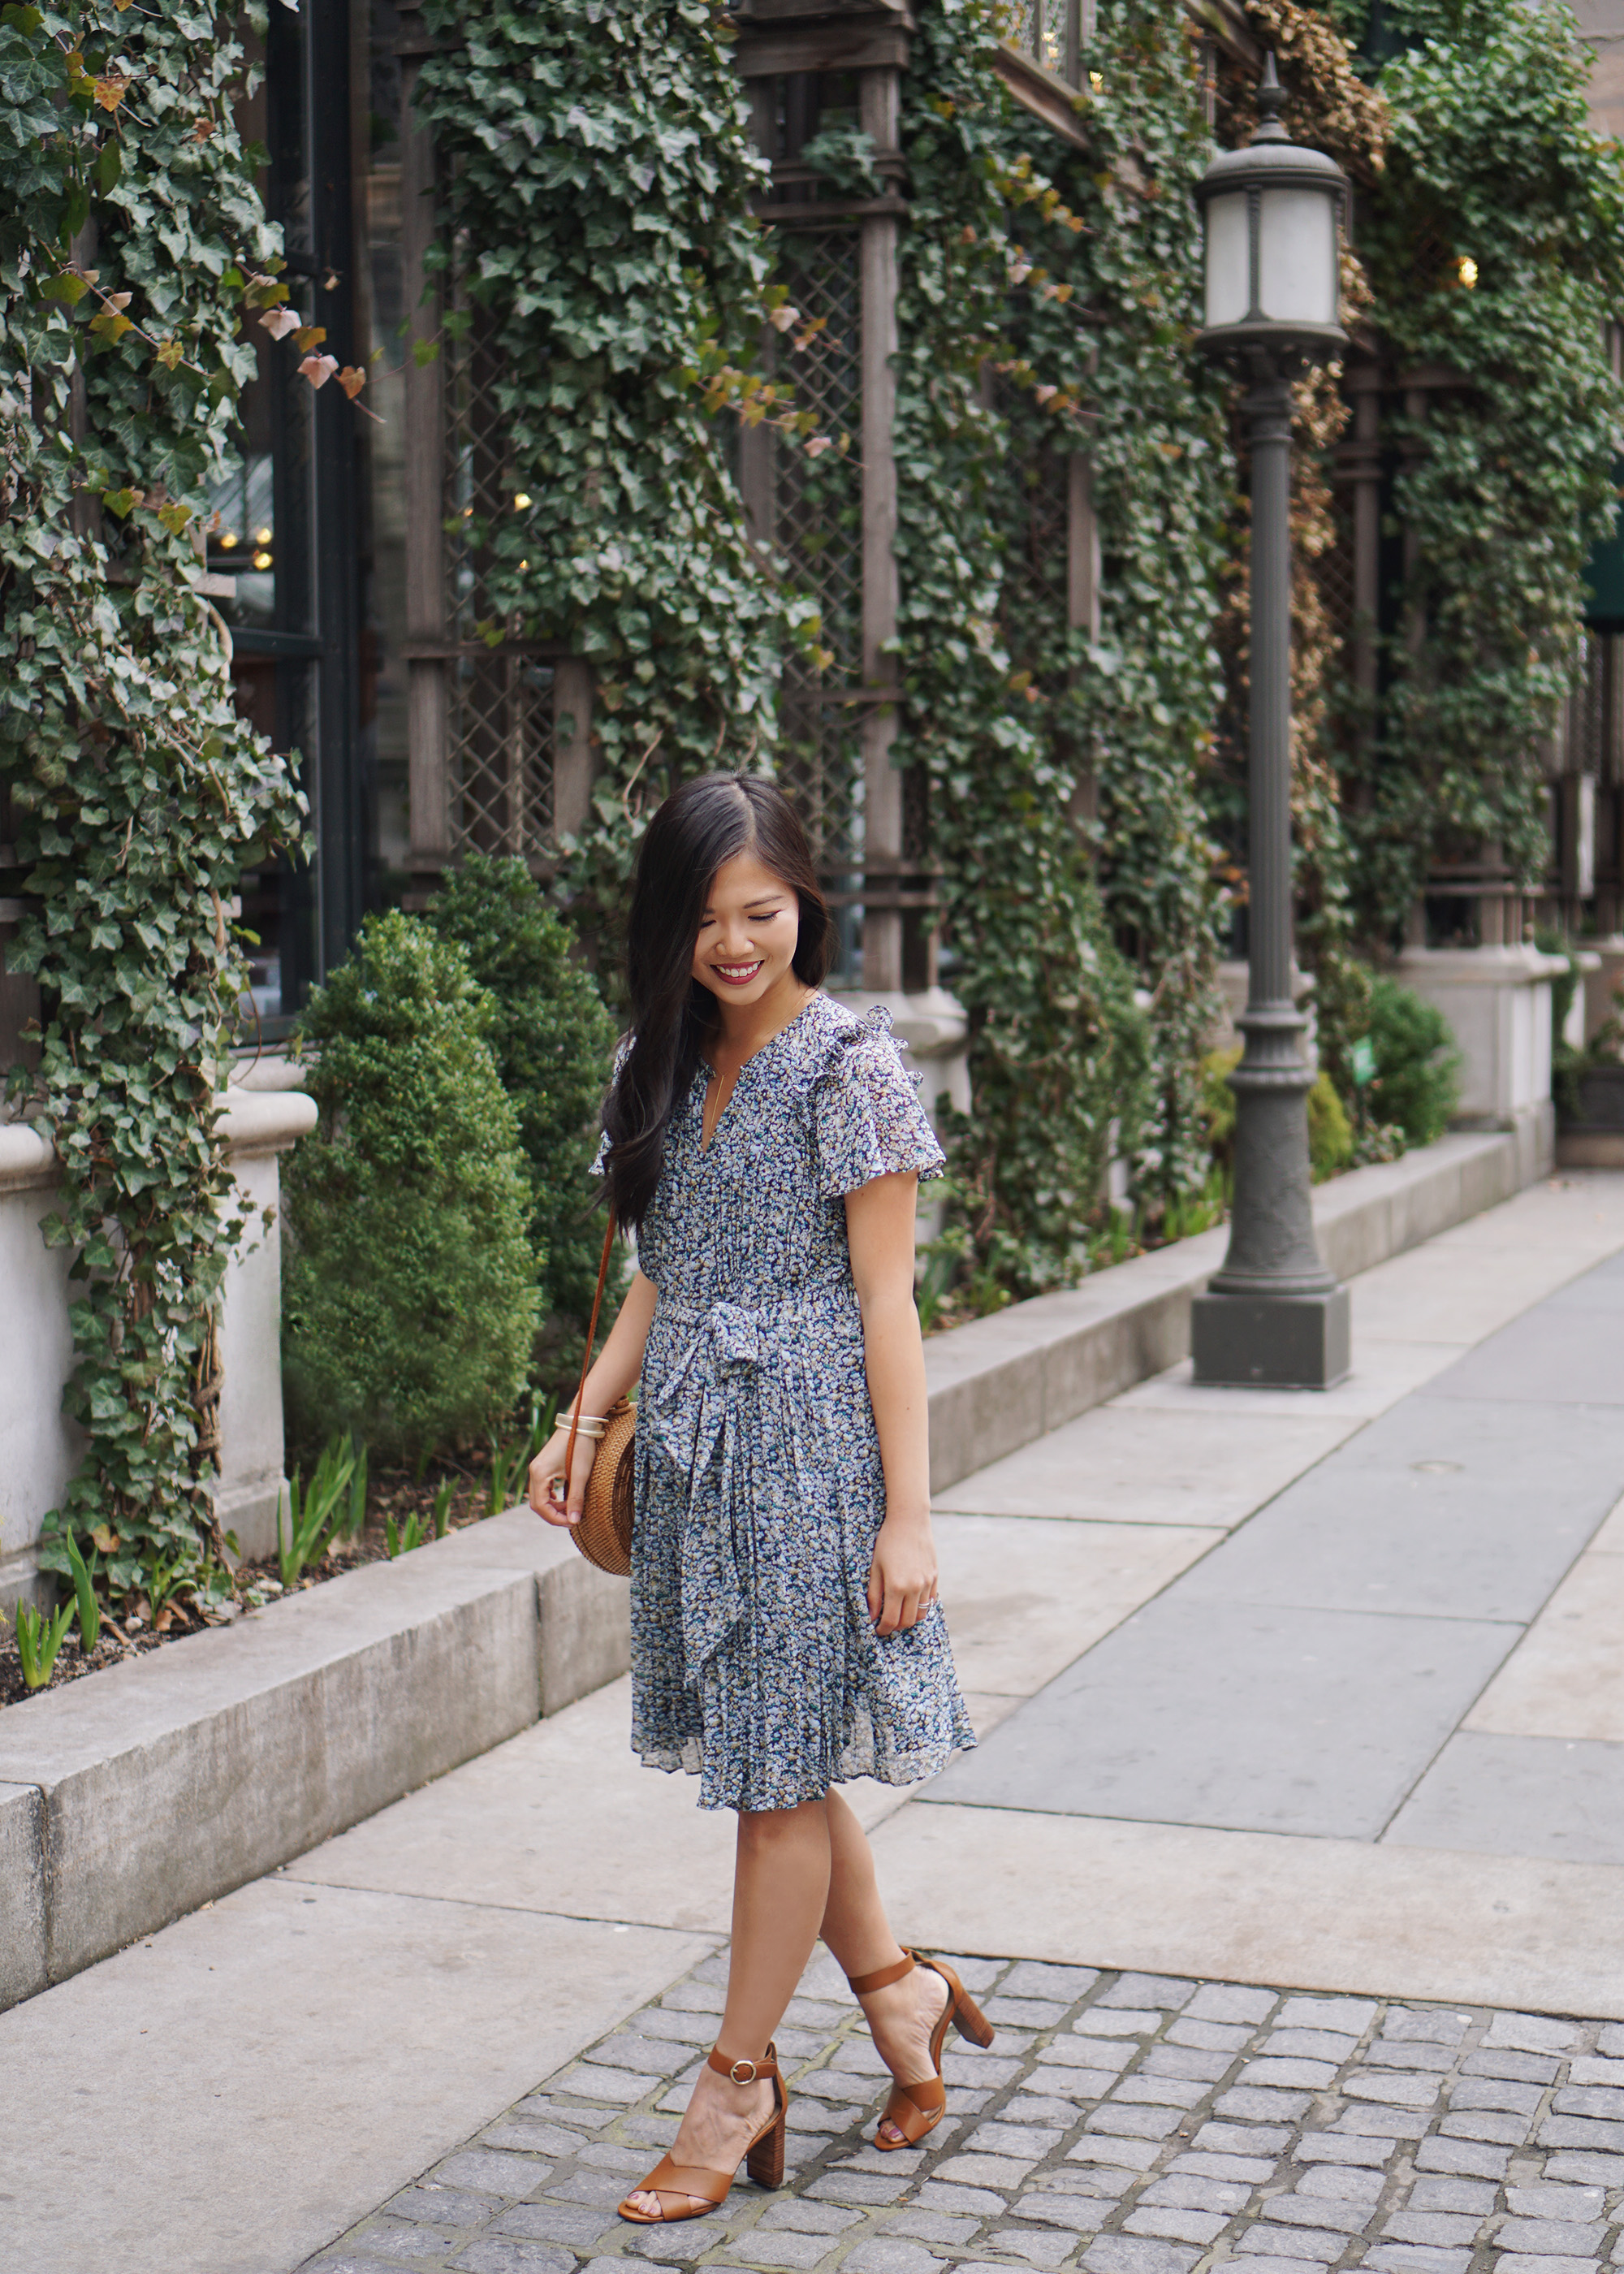 Spring Outfit Idea / Floral Dress & Straw Circle Bag